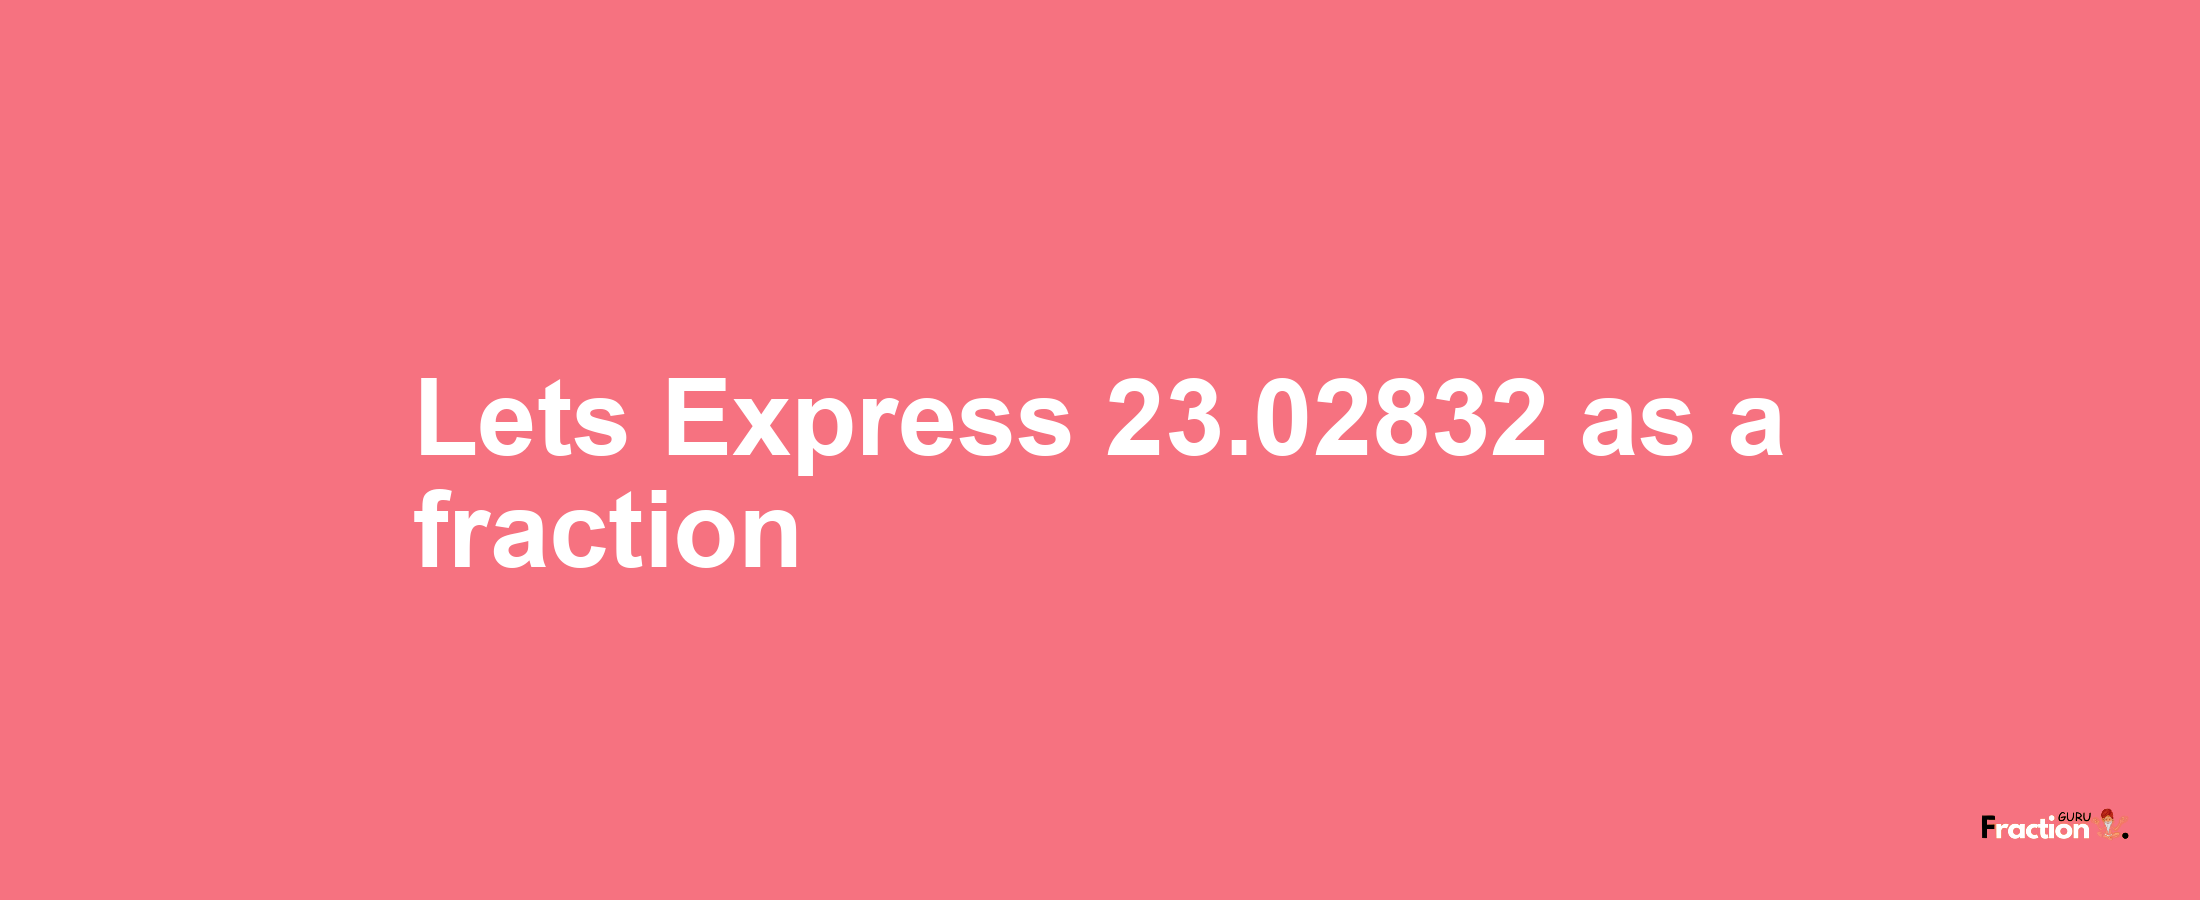 Lets Express 23.02832 as afraction